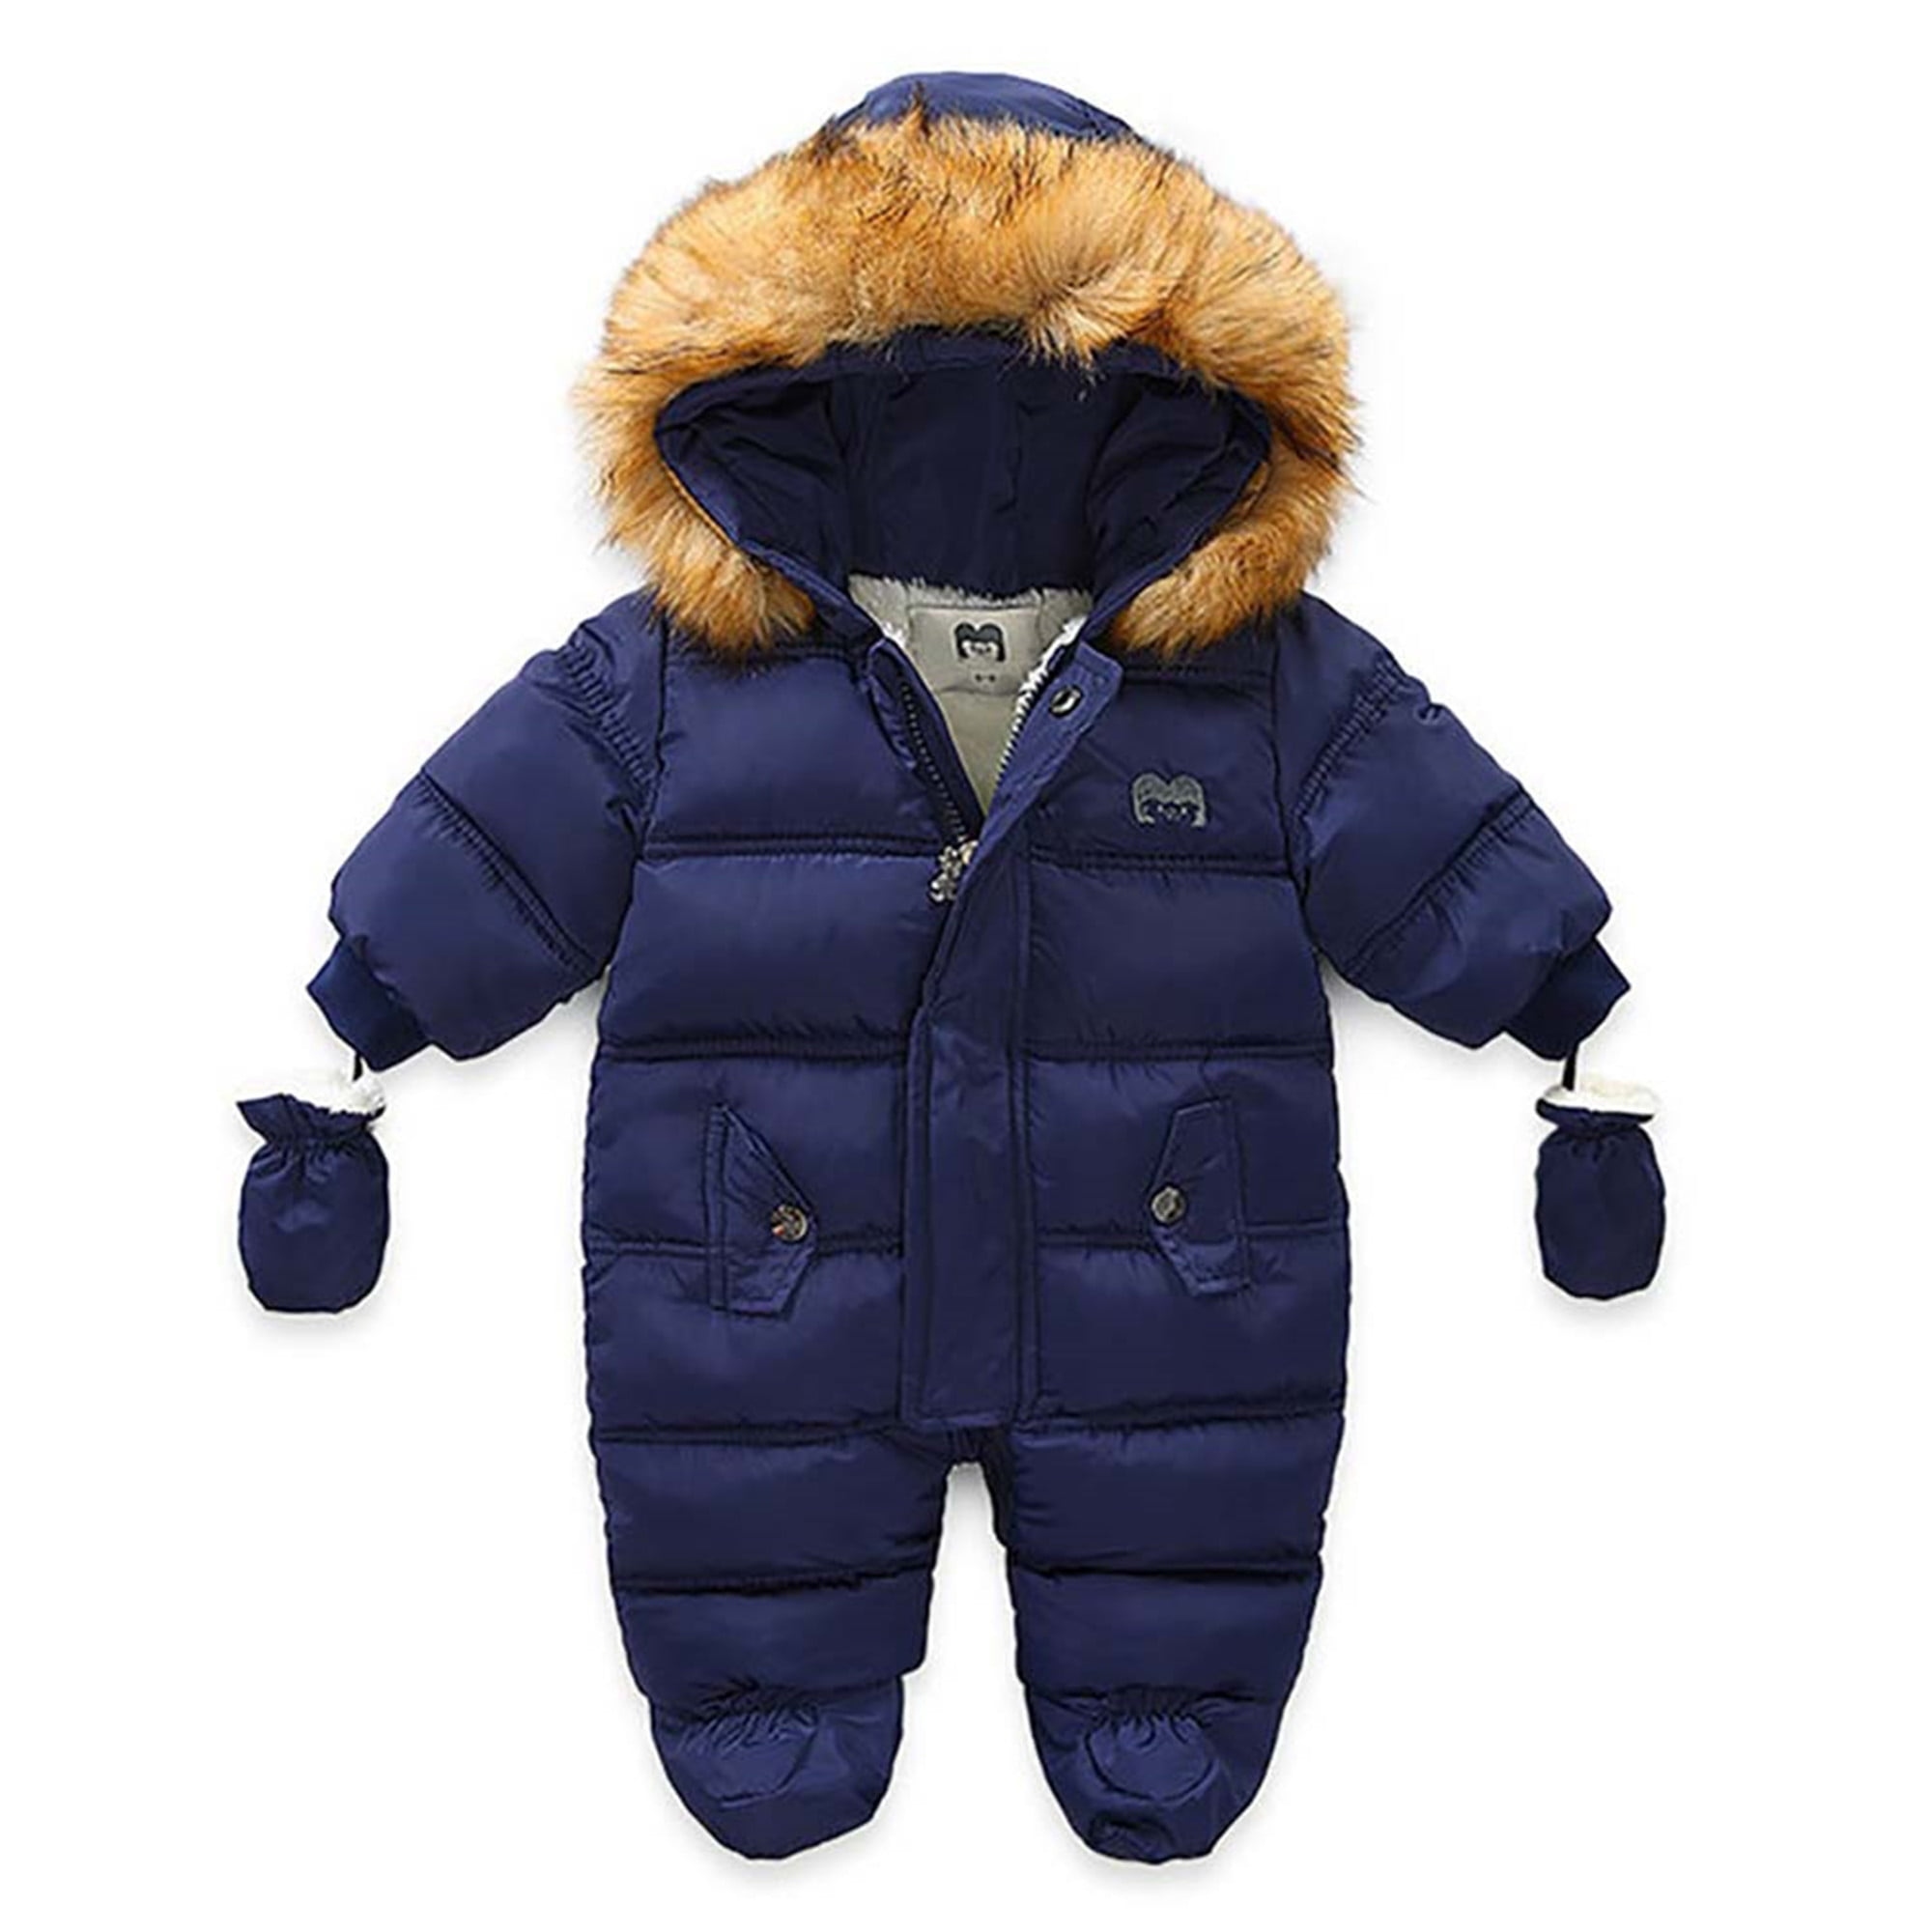 Simplee kids Baby Infant Boy Girl Winter Warm Snowsuit Outwear Newborn Hooded Footed Romper Jumpsuit for 0-18 Months